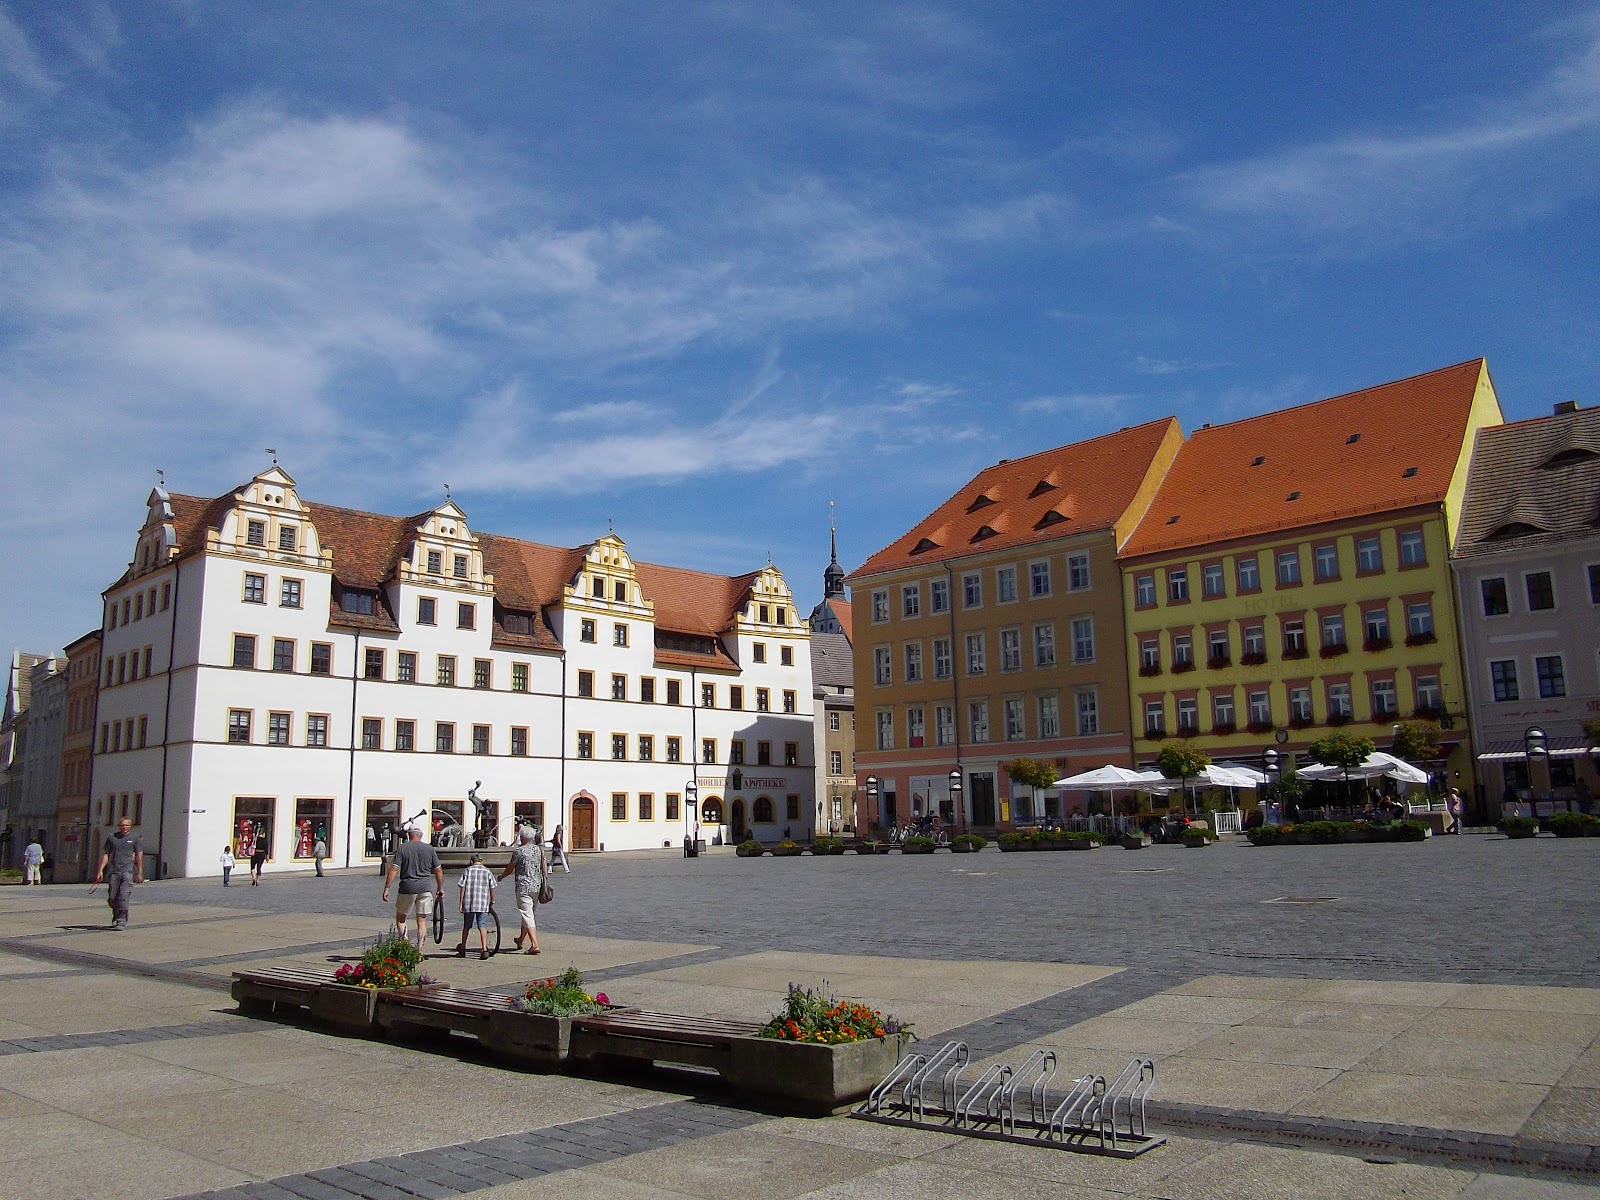 Trip to Torgau, Saxony, Germany - part 1 | Life in Luxembourg